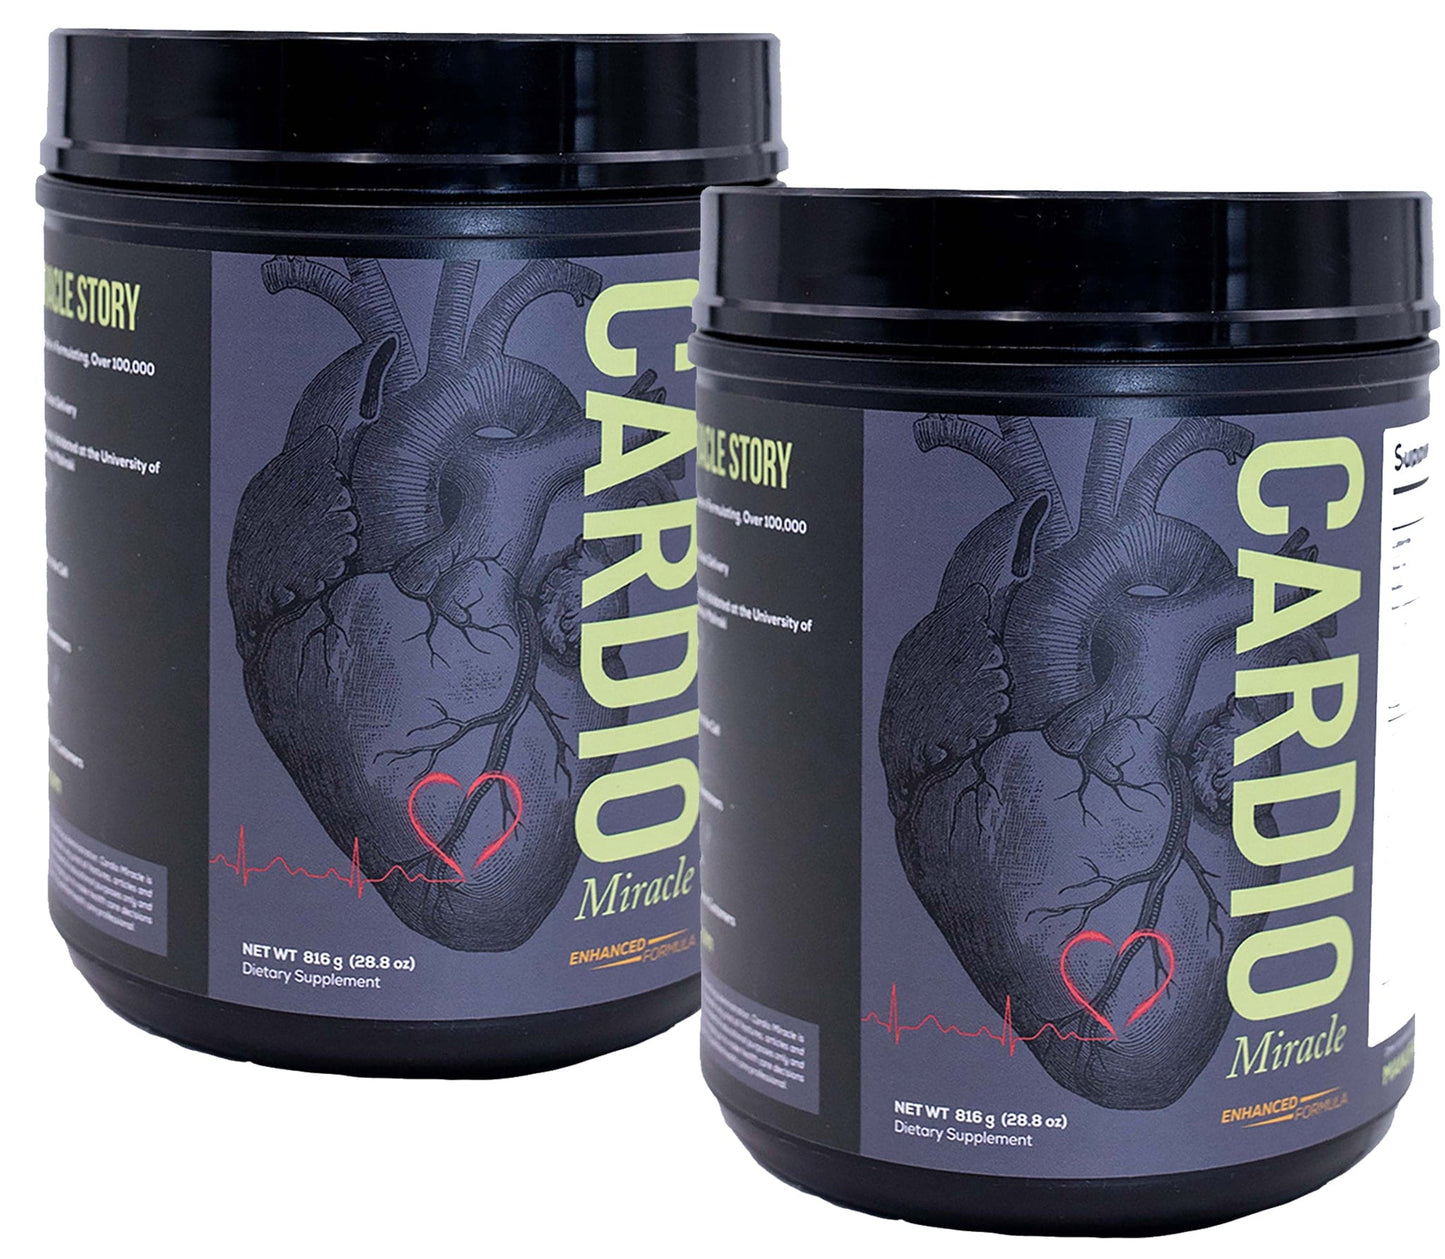 Two (2) 60-Serve Cardio Miracle Canisters (20% Off) Subscription